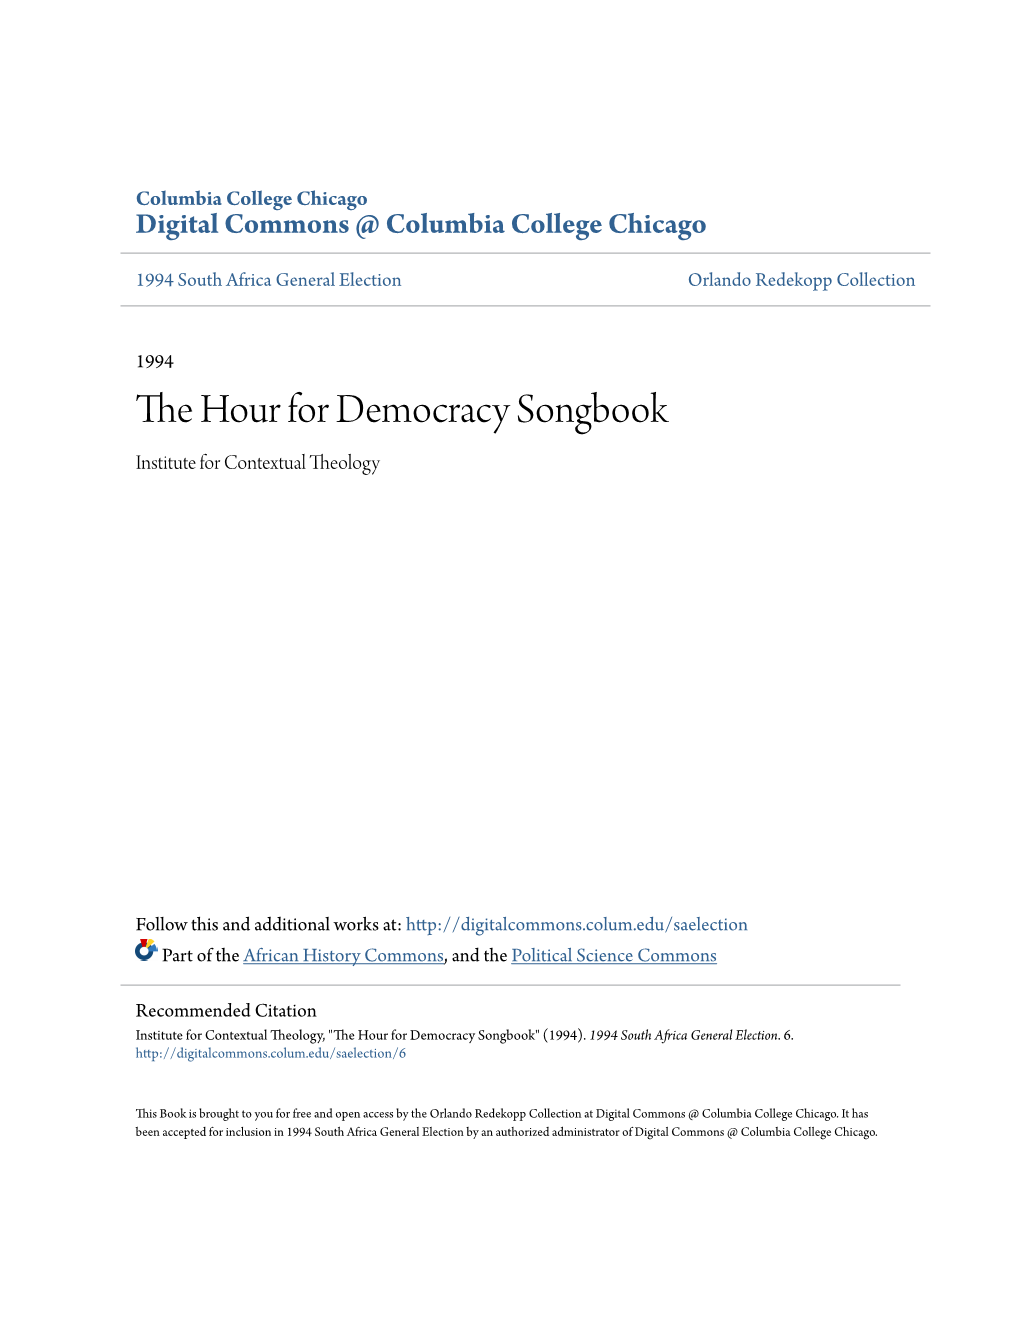 The Hour for Democracy Songbook